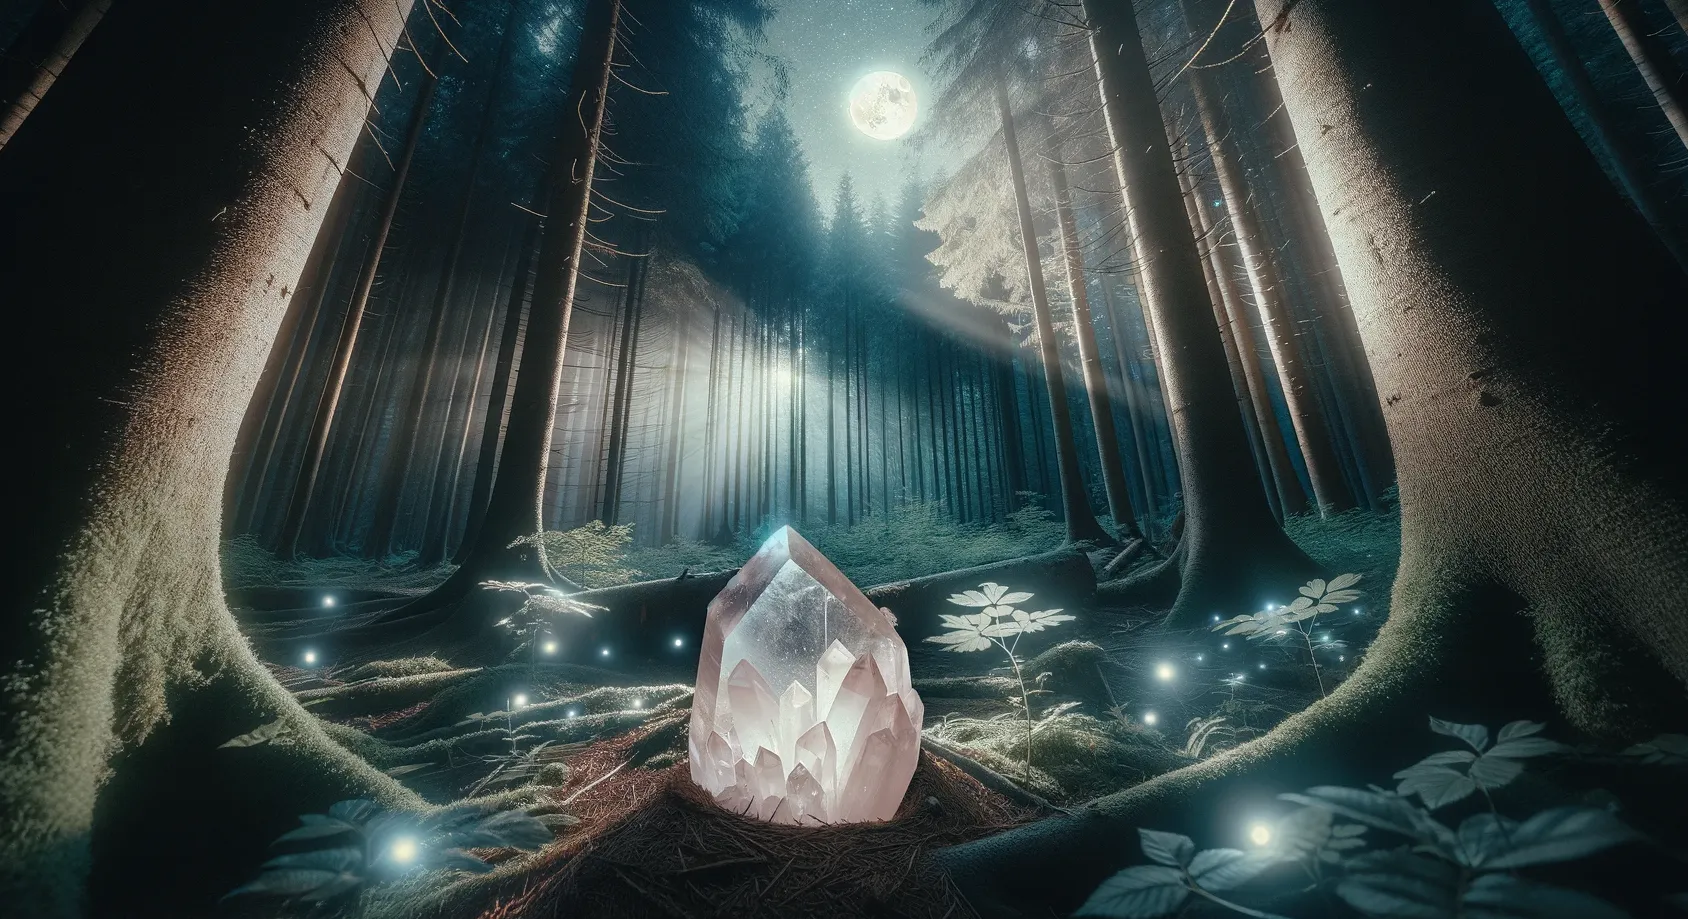 rose quartz crystal being charged by the moonlight in a forest